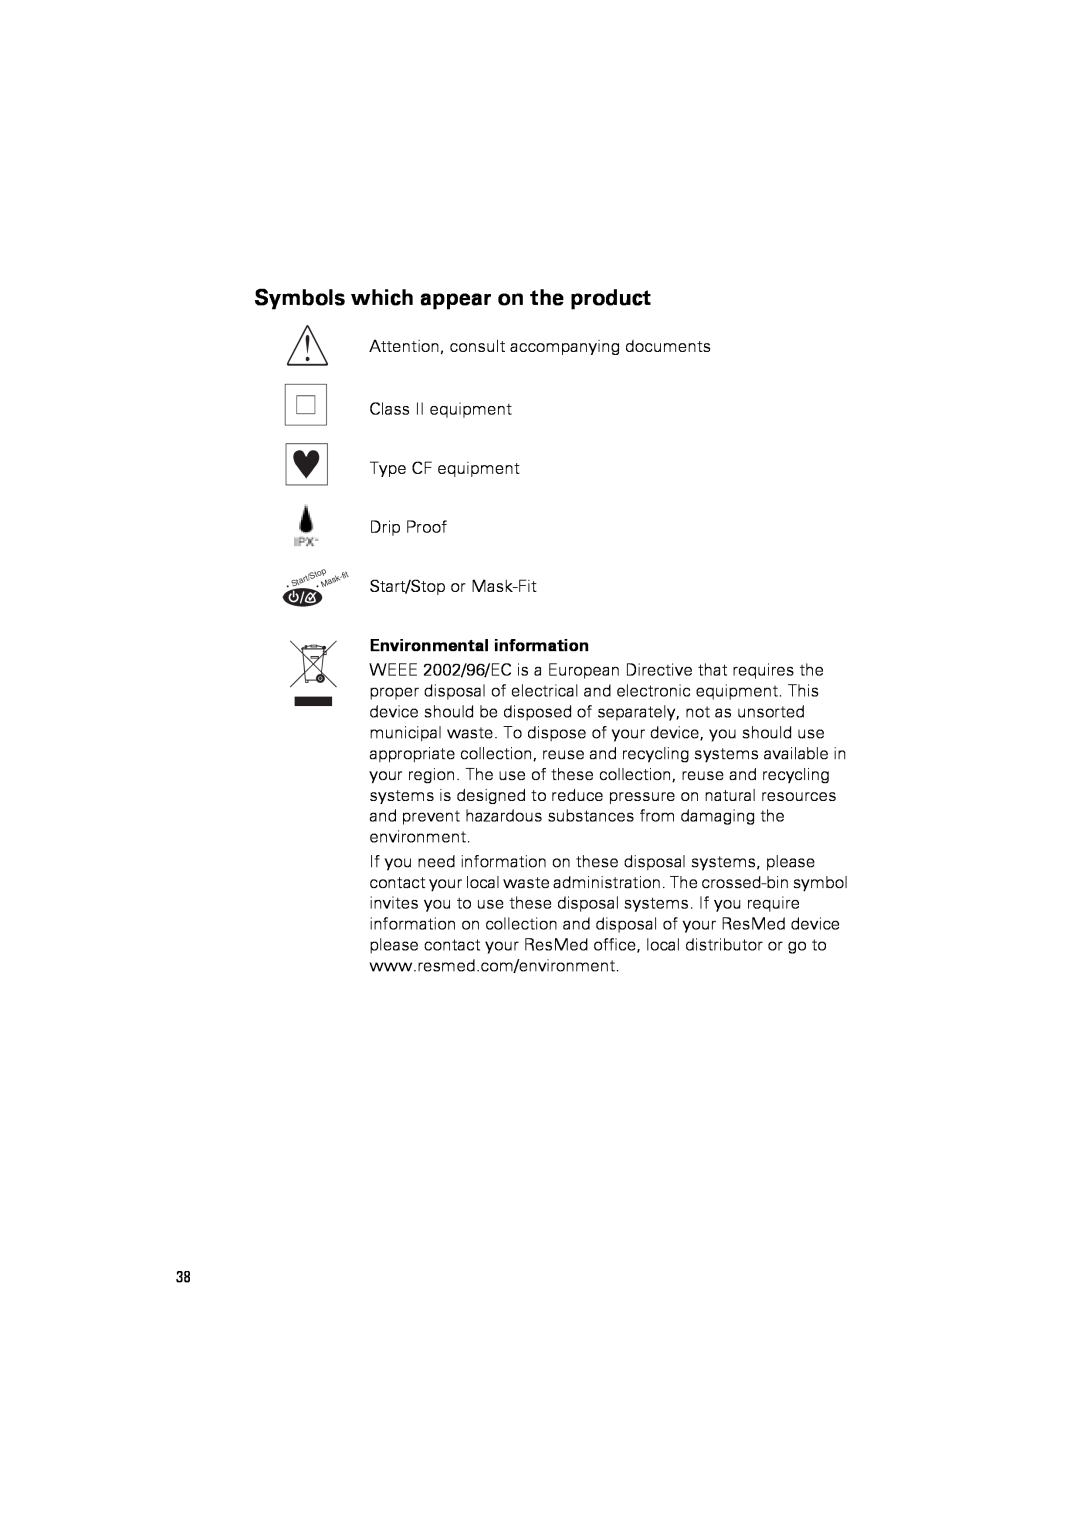 ResMed III user manual Symbols which appear on the product, Environmental information 